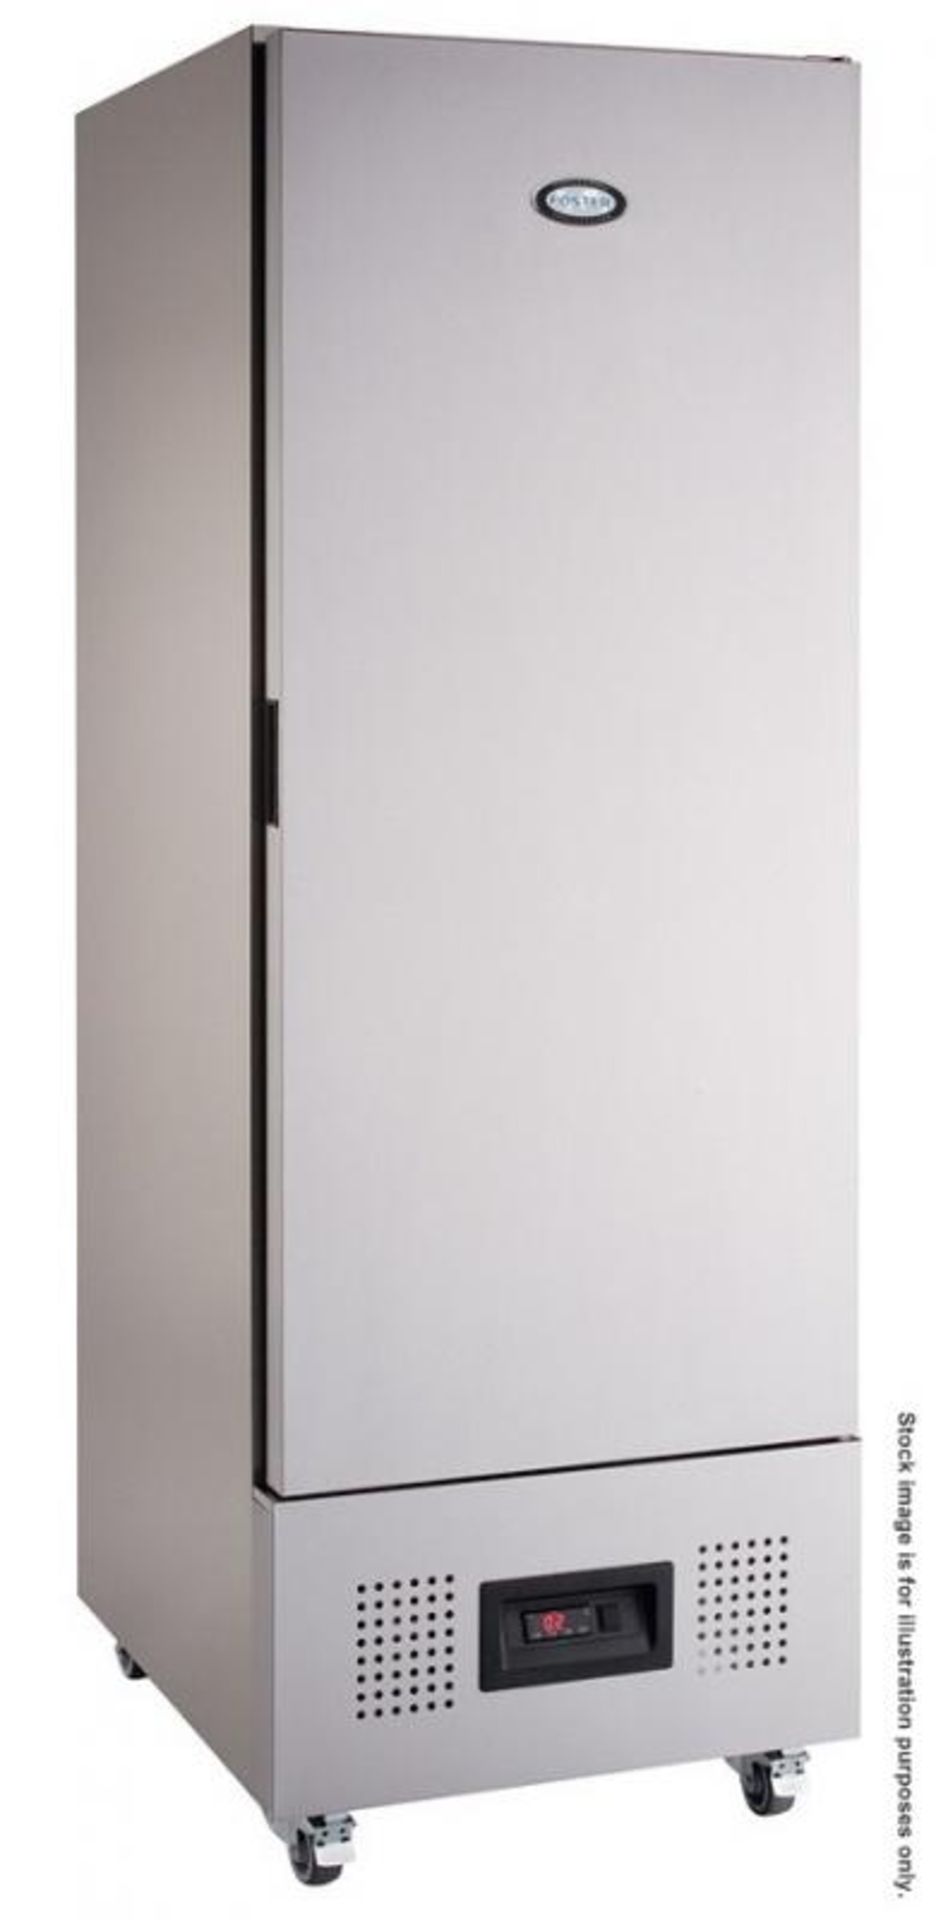 1 x FOSTER FSL400H Upright Slimline Commercial Refrigerator - Stainless Steel - Dimensions: W60 x D6